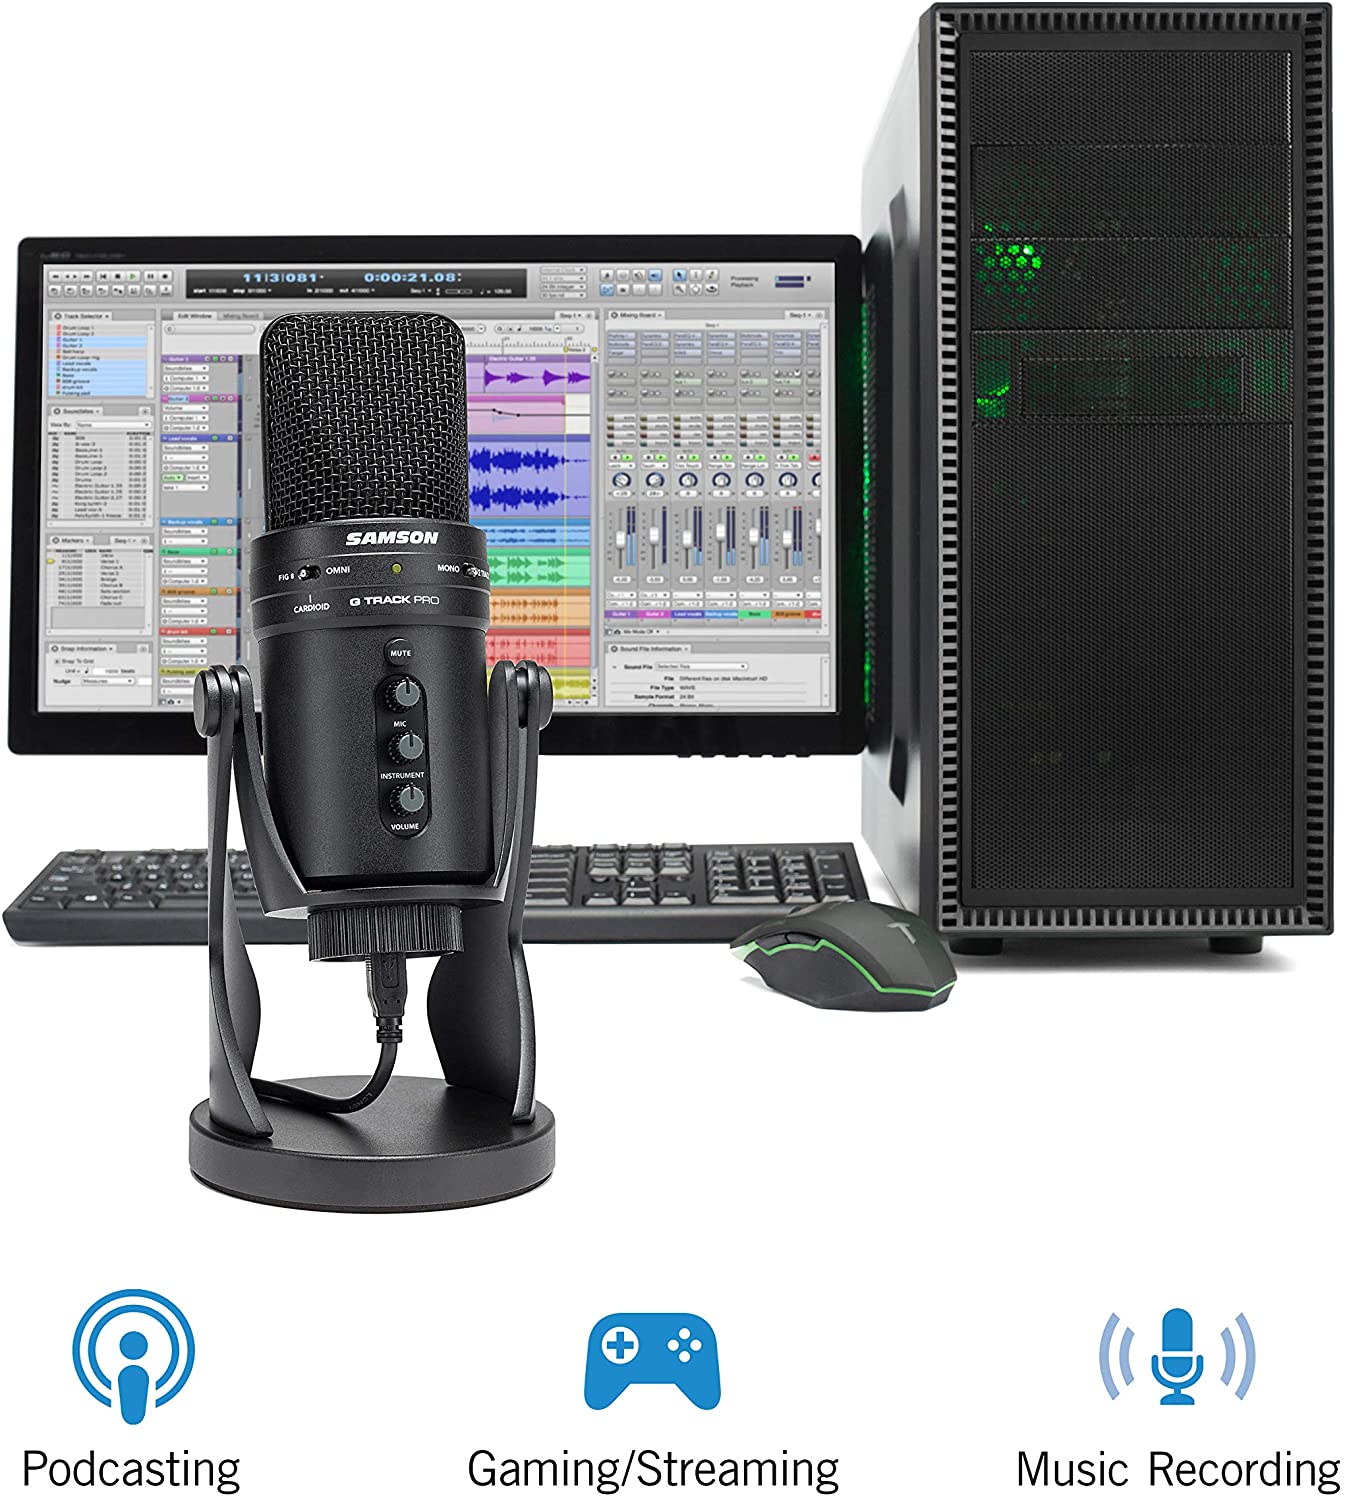 Samson G-Track Pro USB Condenser Microphone with Built-In Audio Interface - Pro-Distributing